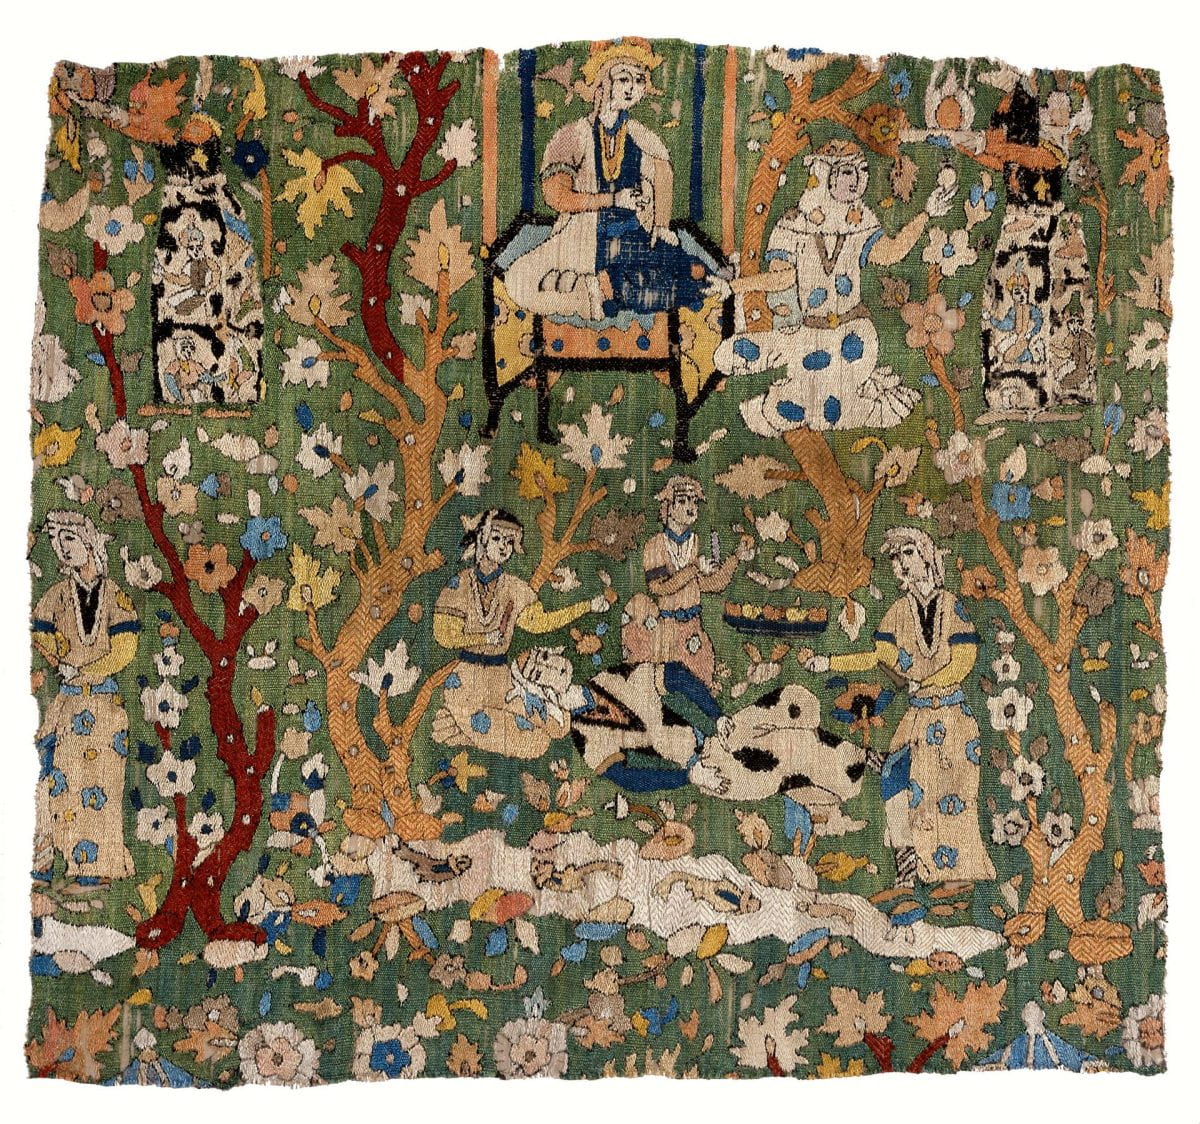 Almost square textile fragment with a green background and details of various figures in garden scenes